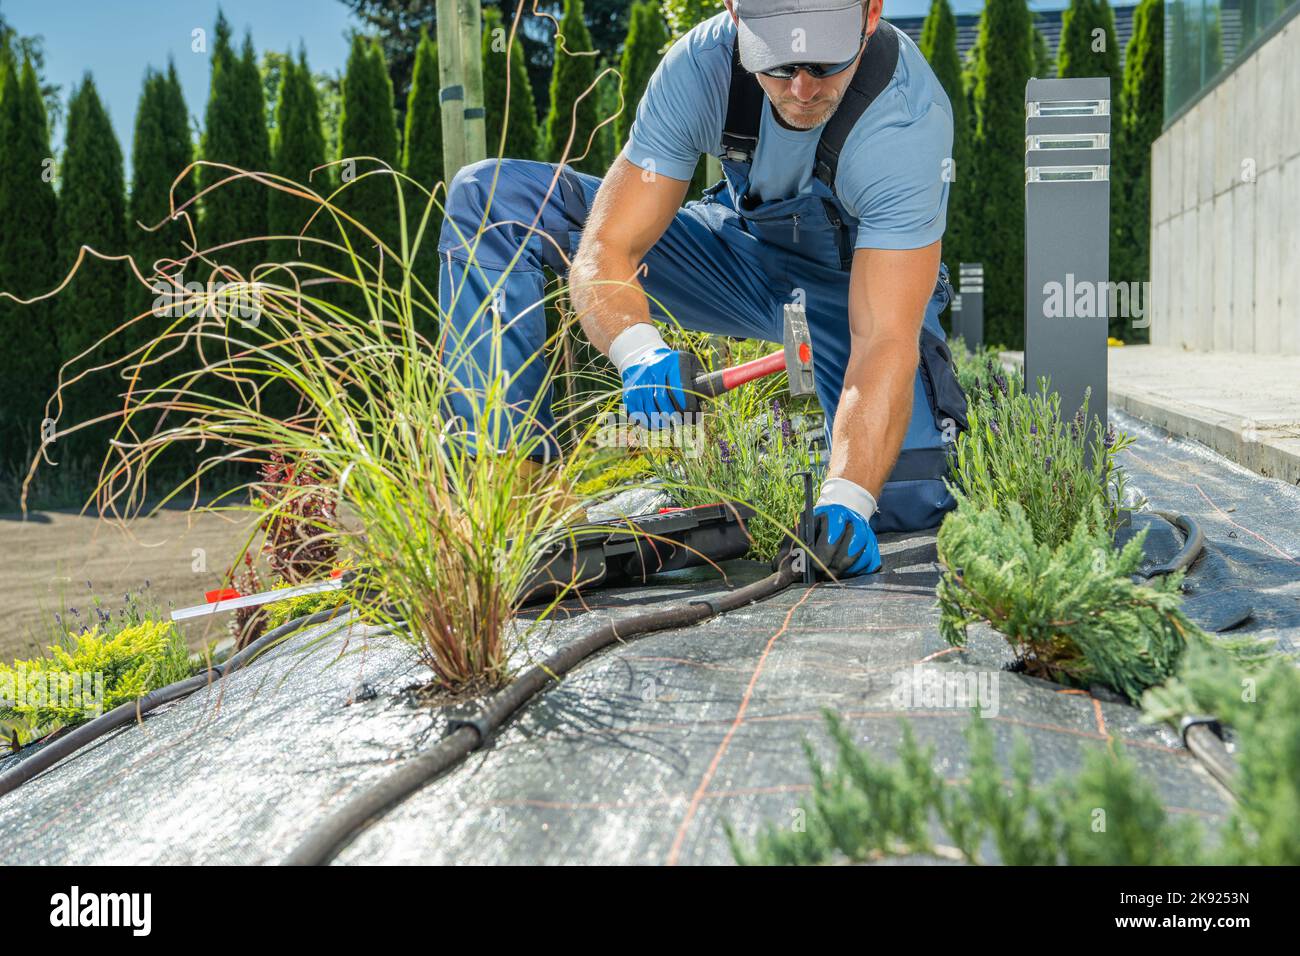 Caucasian Gardener Installing Pipeline to Provide Water Supply to Plants by Automatic Irrigation System. Garden Care and Maintenance Theme. Stock Photo